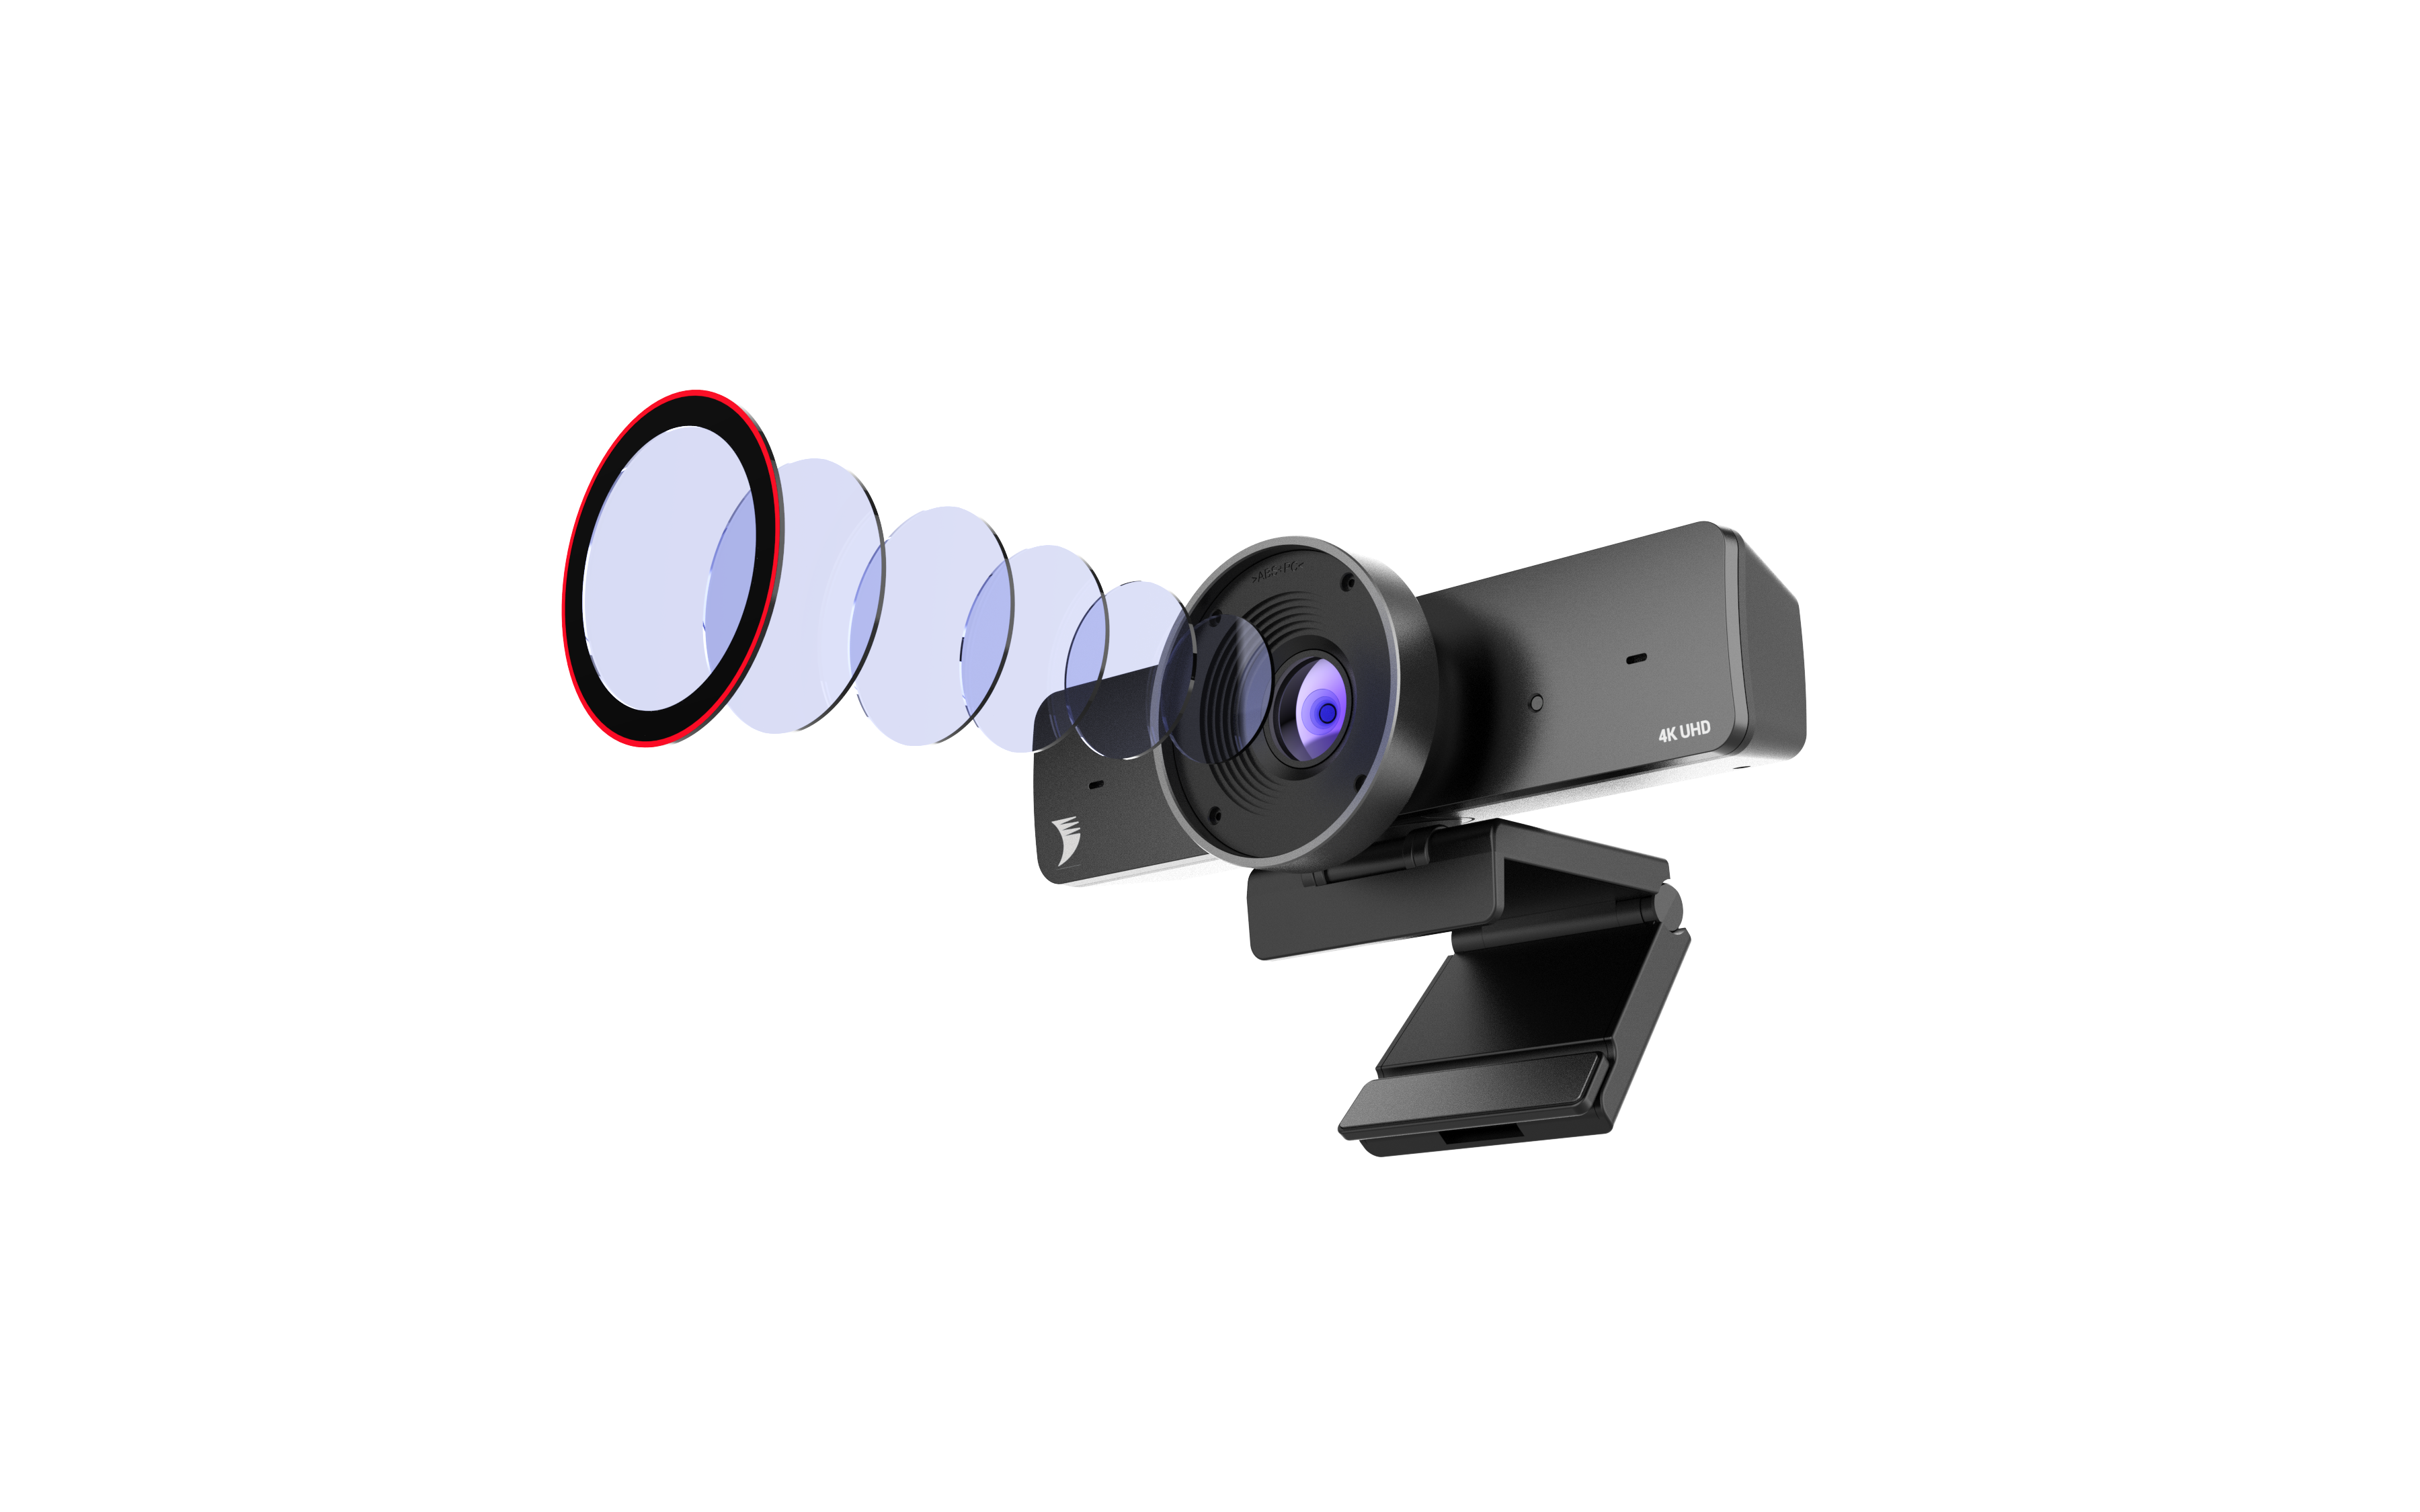 WyreStorm Introduces Zoom-Certified FOCUS 200 4K AI Webcam to Simplify Video Conferencing in Small and Medium Meeting Rooms